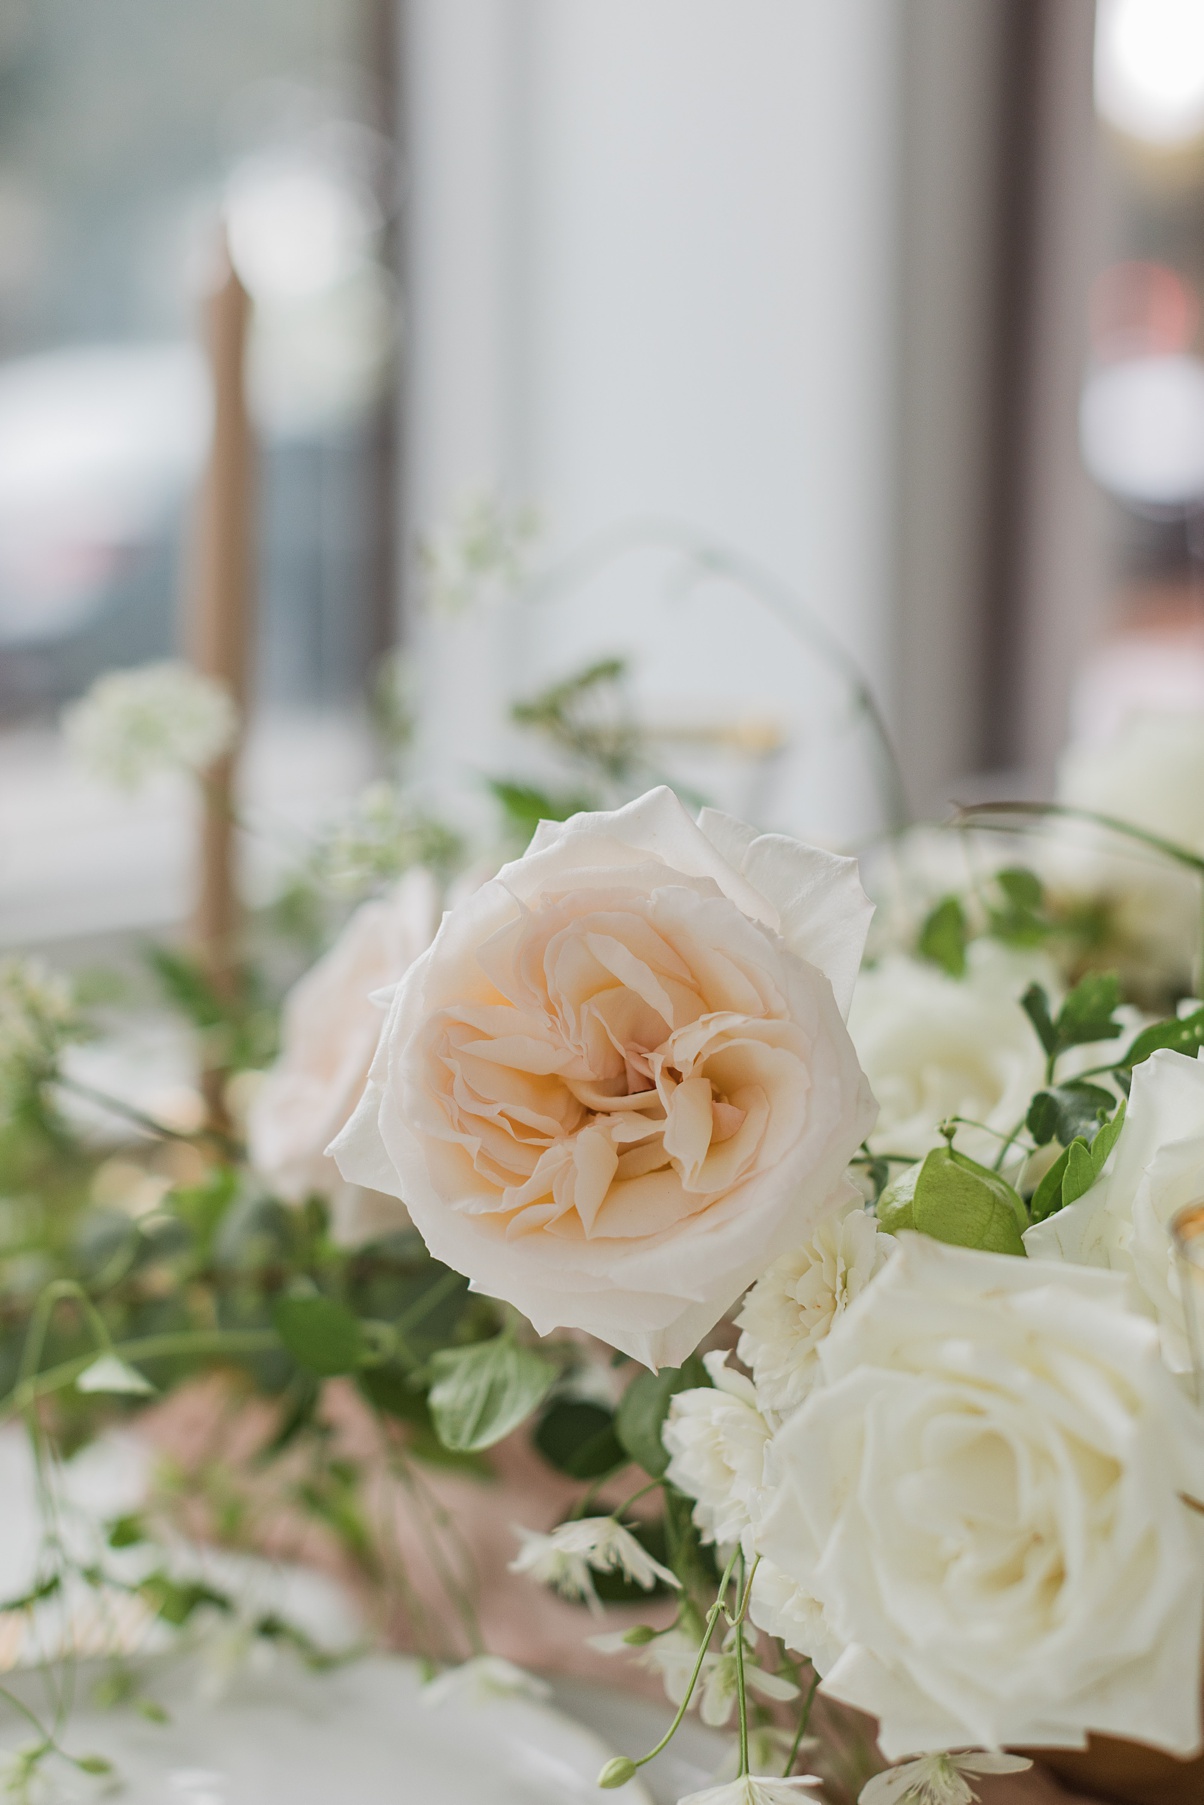 A close up of white and blush garden roses